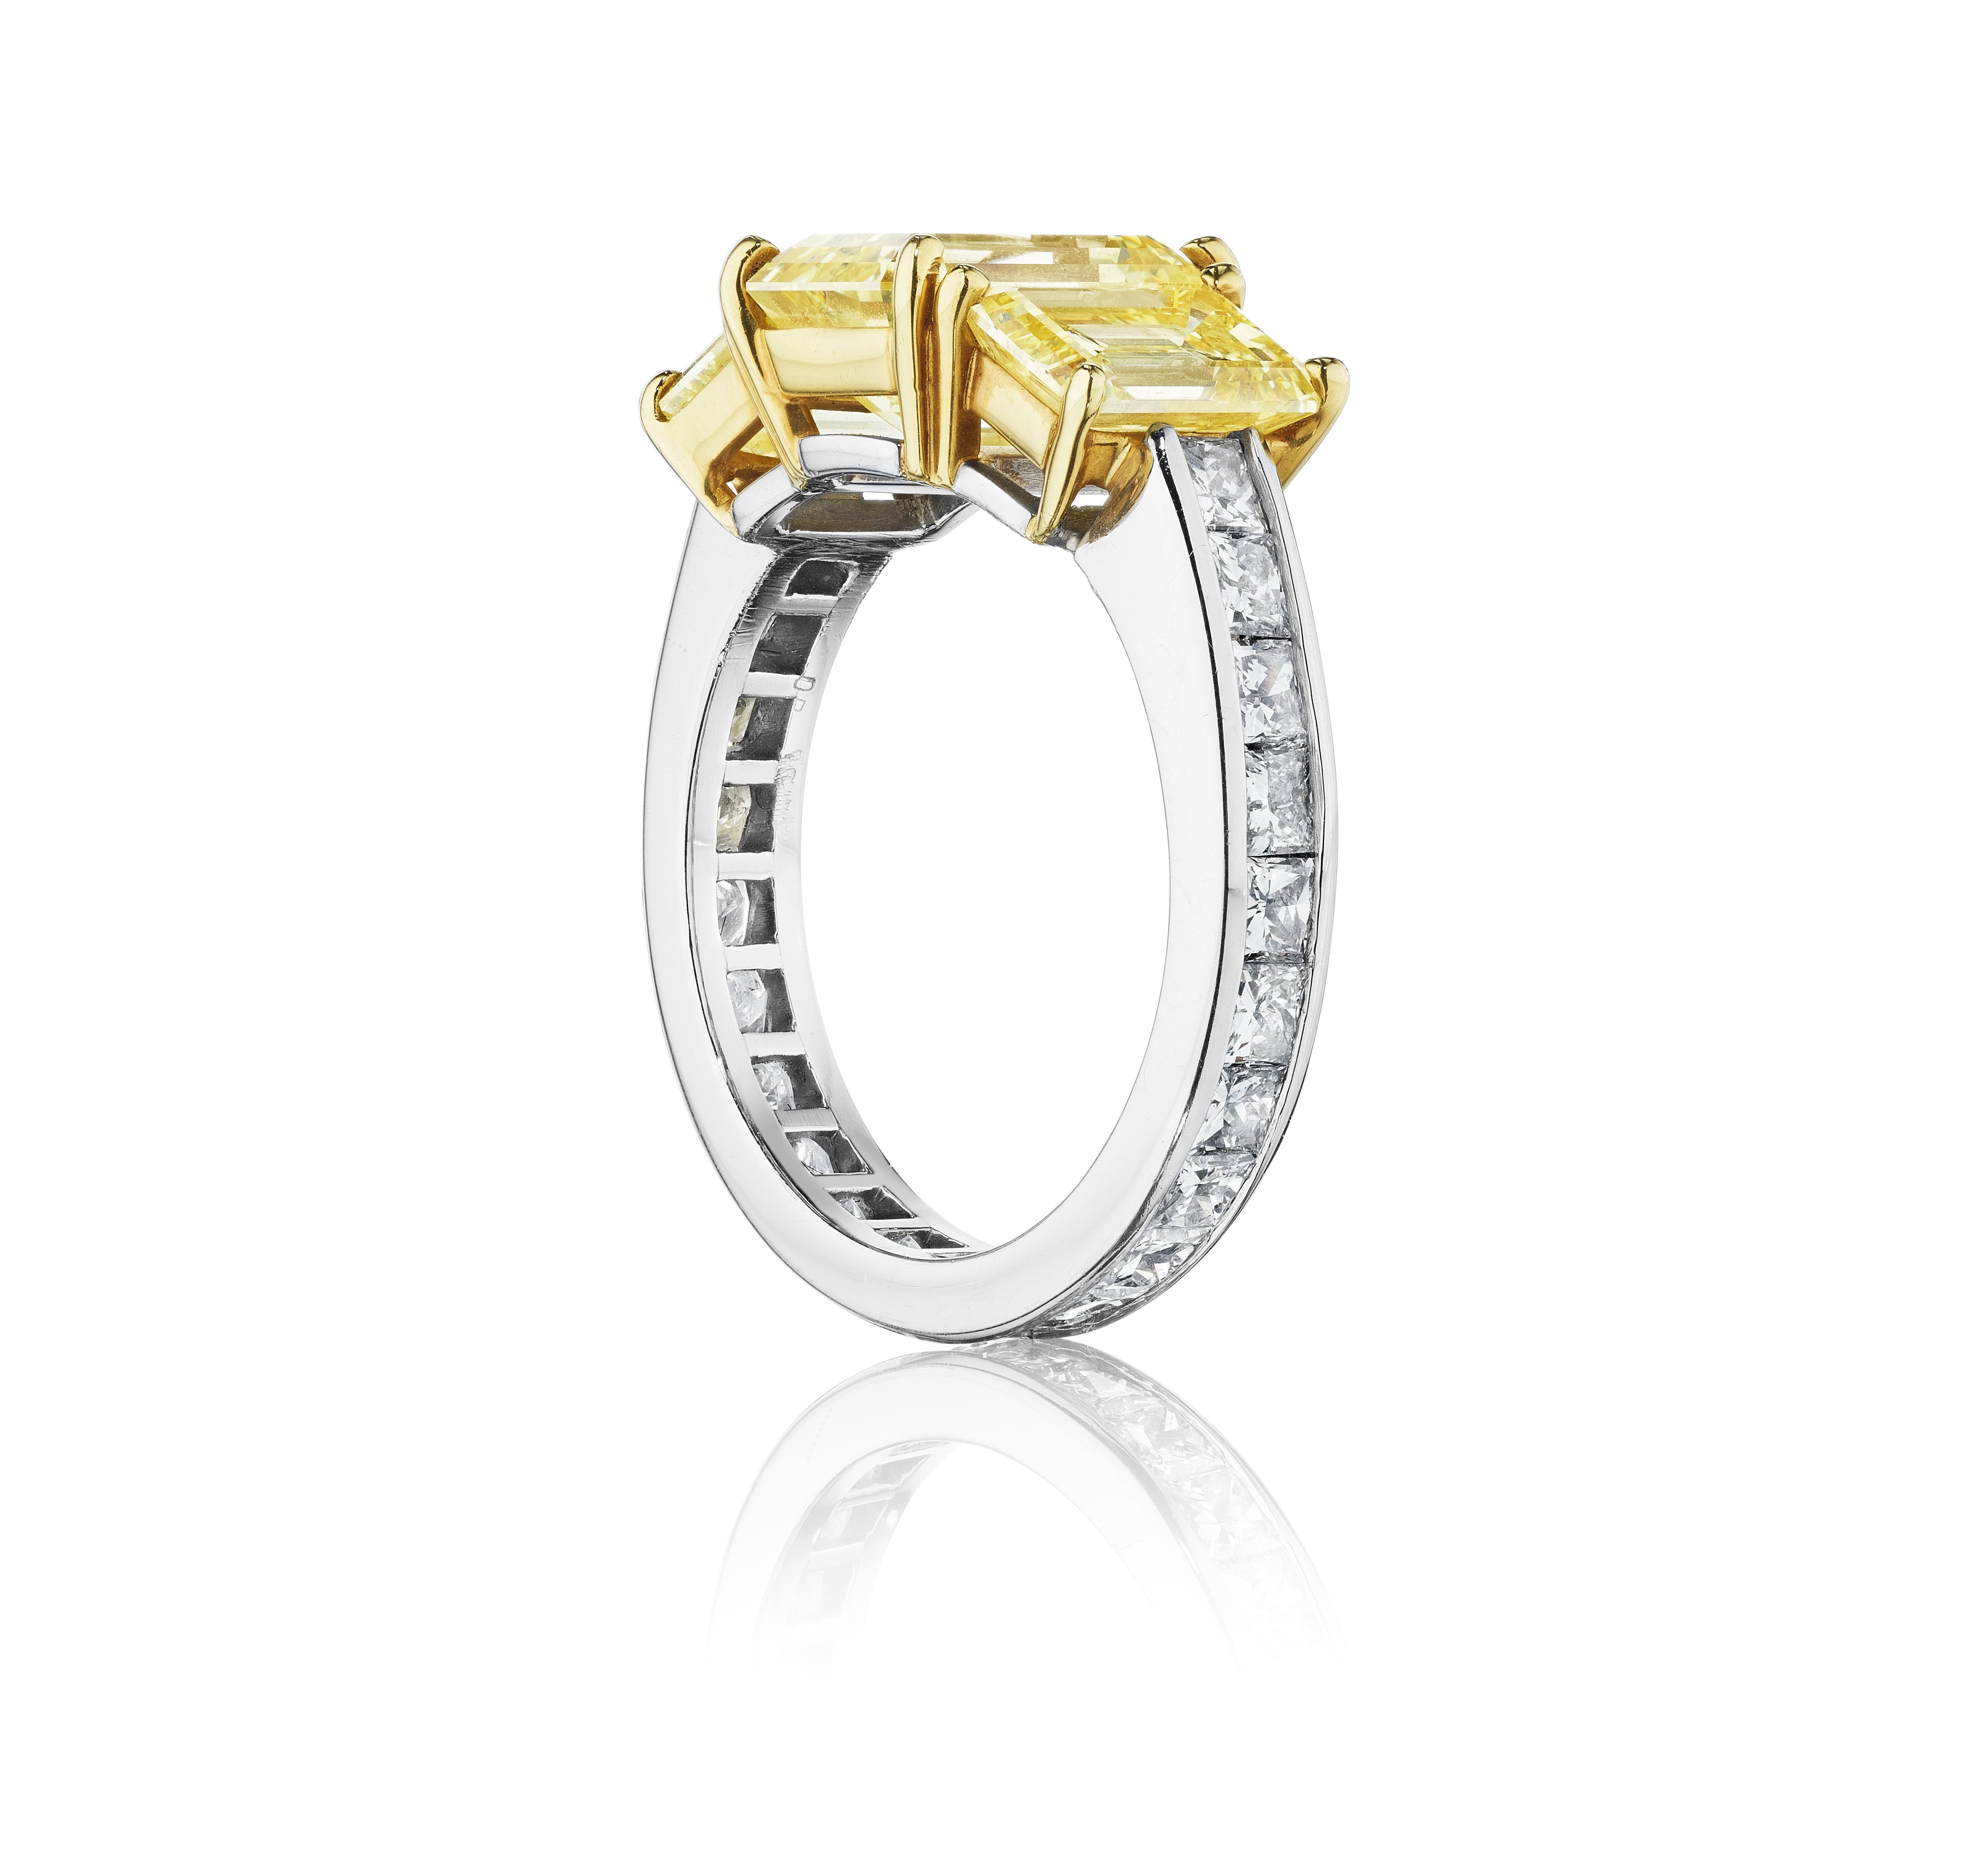 A ring centered by three slightly graduating prong-set, emerald-cut fancy intense yellow diamonds, offset by a channel set band of princess-cut diamonds; mounted in 18K yellow gold and platinum
• 3 emerald-cut yellow diamonds, weighing 1.06, 1.02,